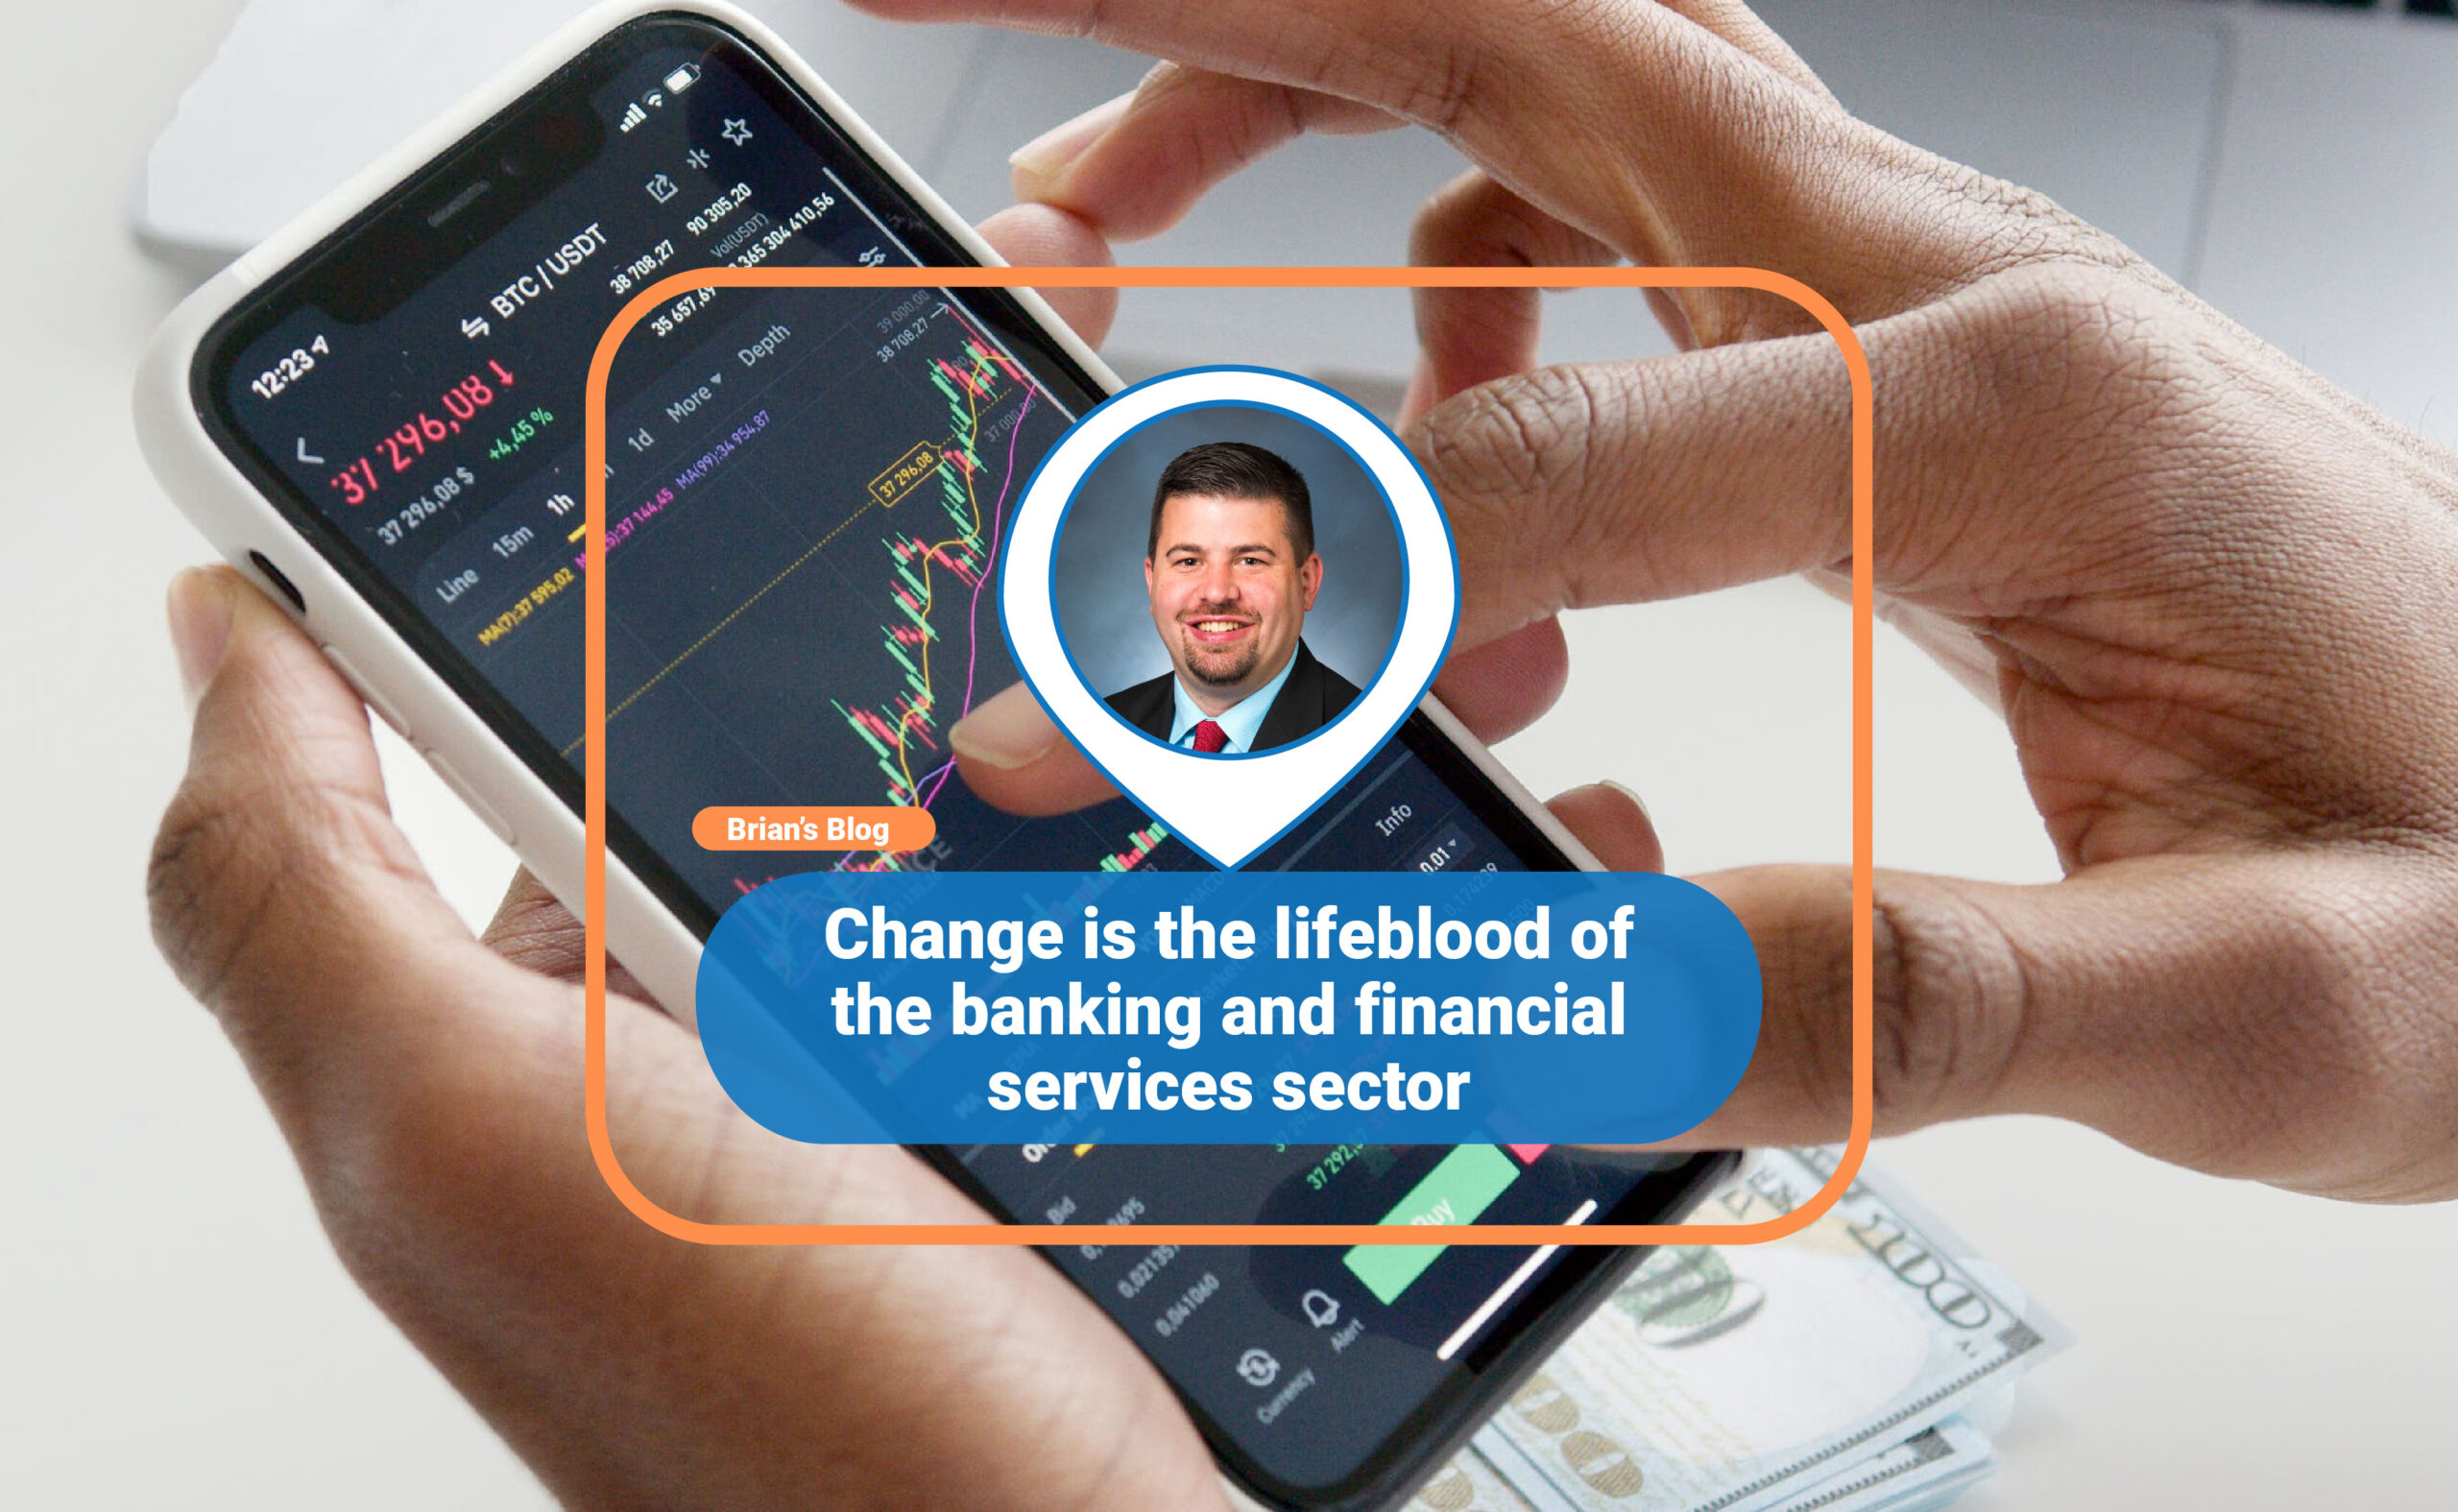 Change is the lifeblood of the banking and financial services sector